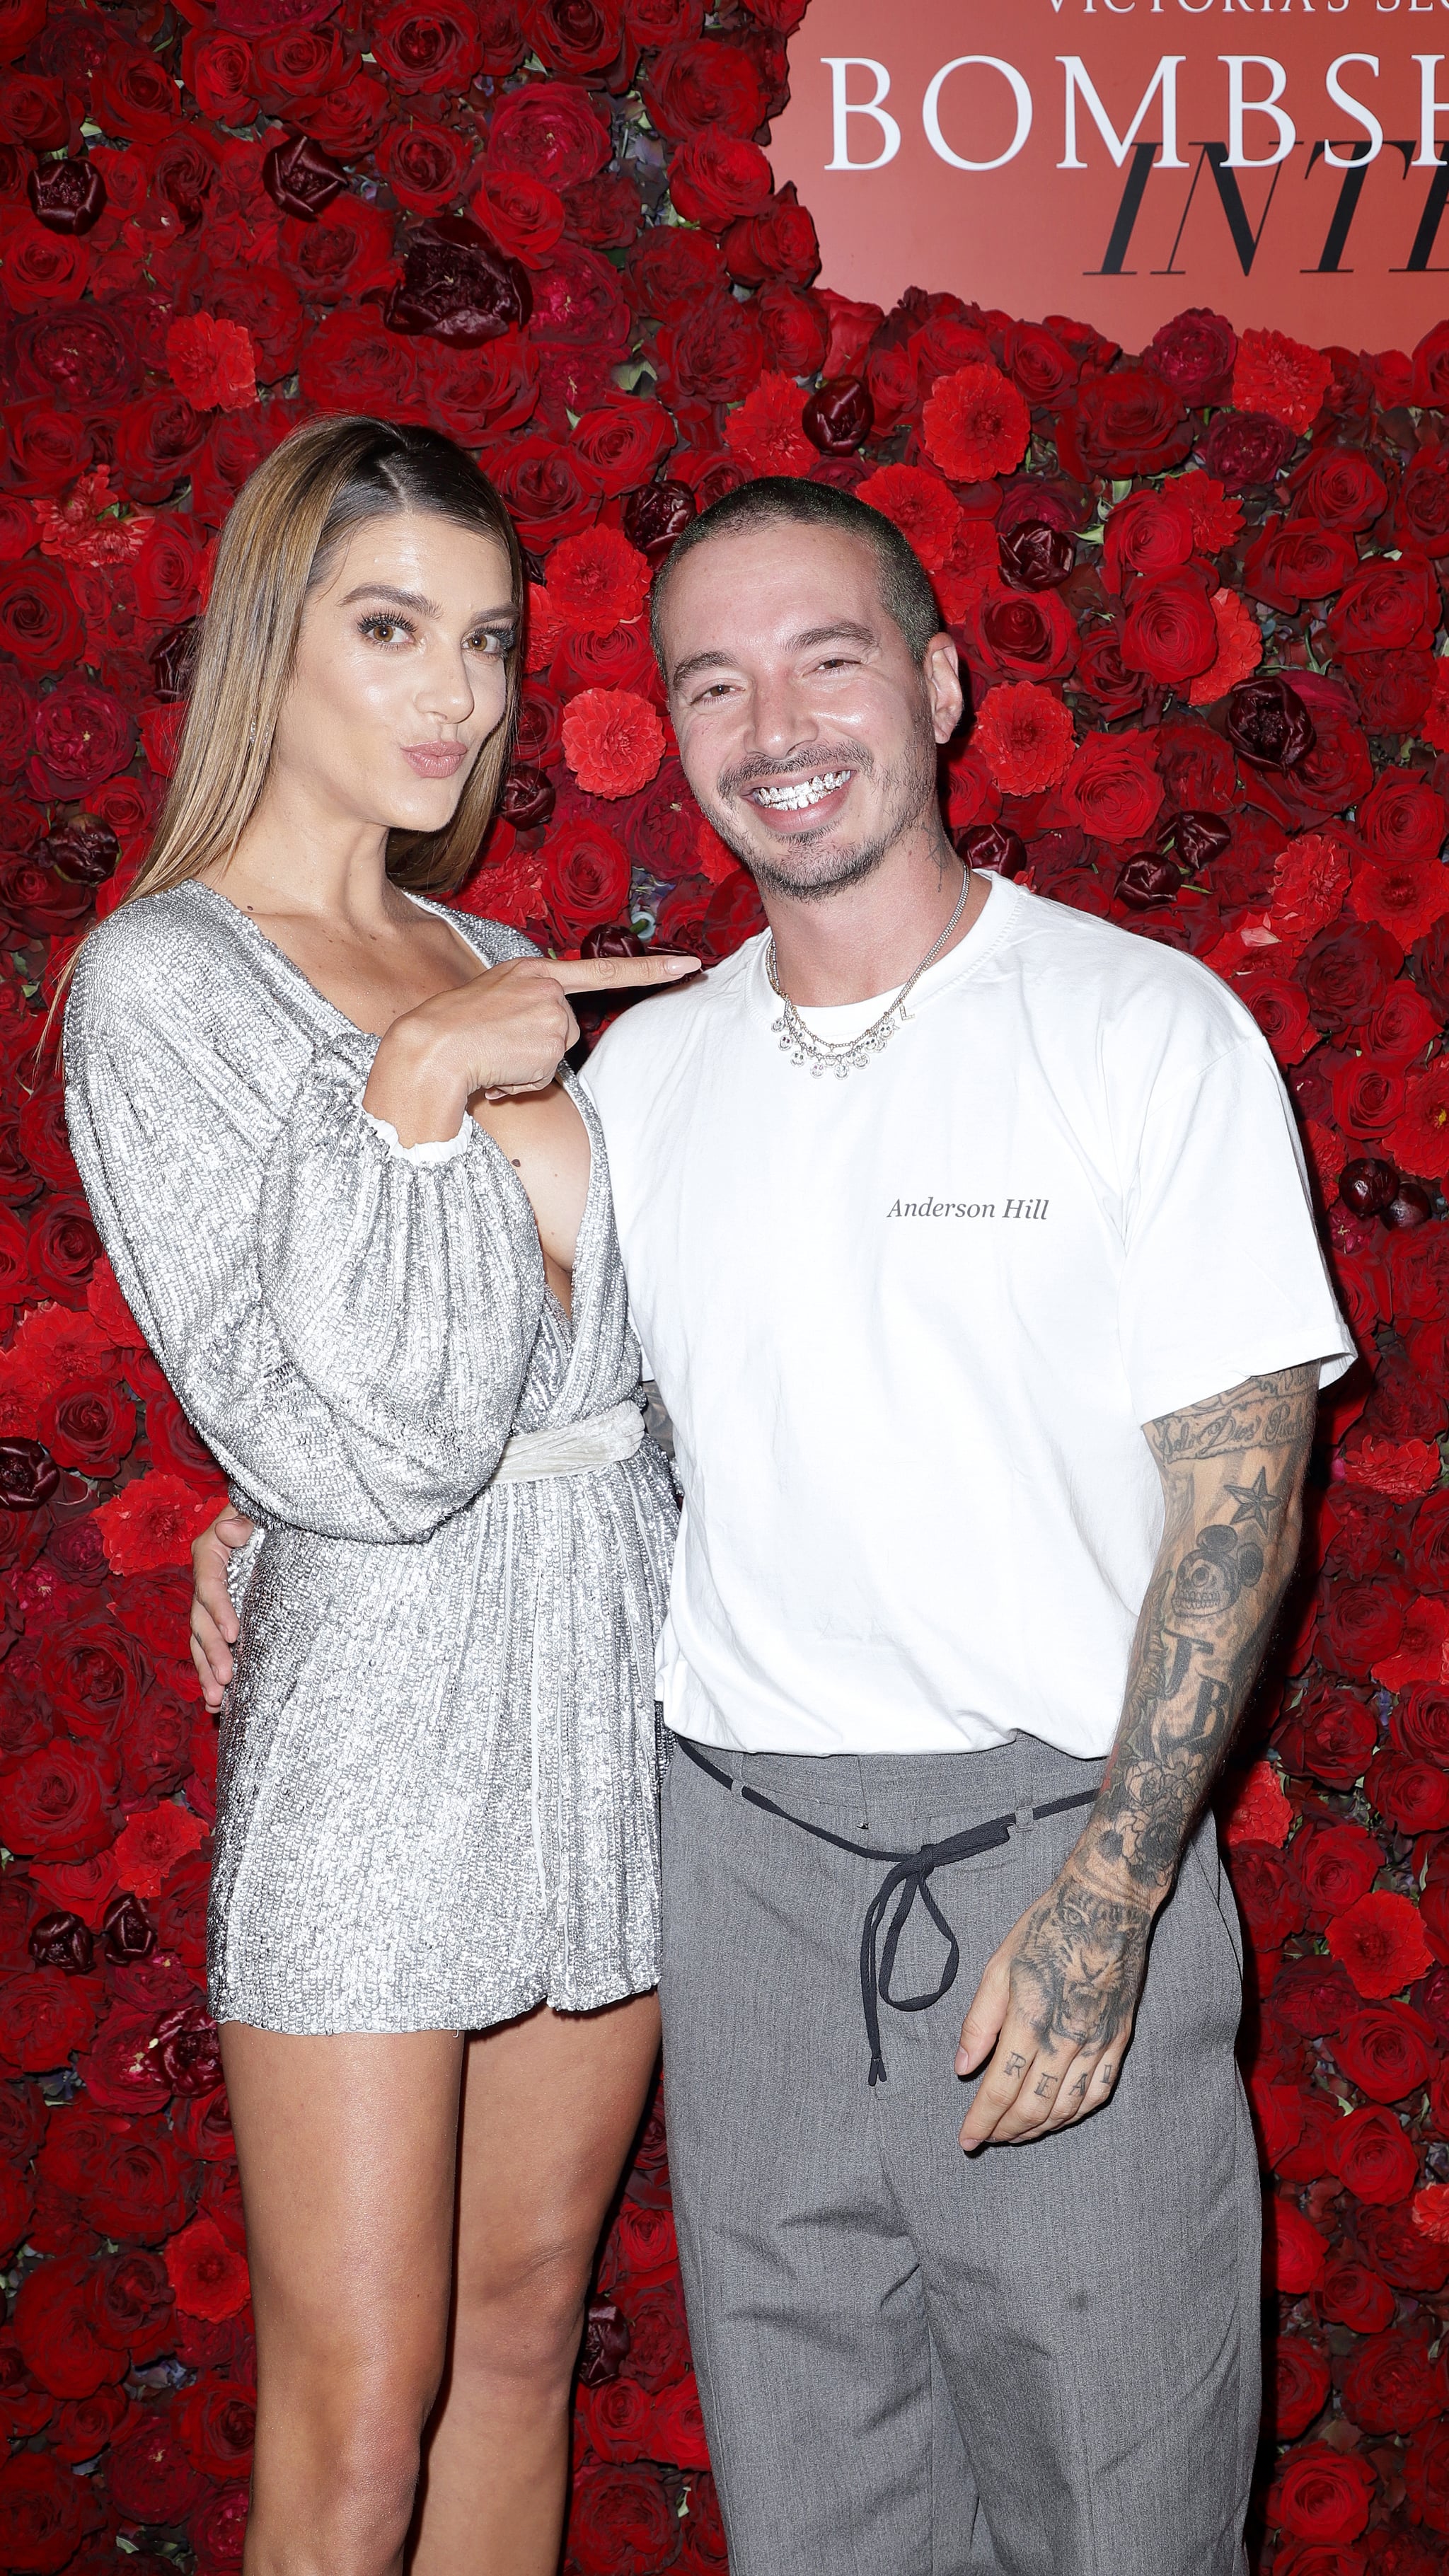 NEW YORK, NEW YORK - SEPTEMBER 05:  (EDITORS NOTE: Retransmission with alternate crop.) Valentina Ferrer and Jay Balvin attends Victoria's Secret Angel Sara Sampaio Hosts The Bombshell Intense Launch Party on September 05, 2019 in New York City. (Photo by John Parra/Getty Images for Victoria's Secret)